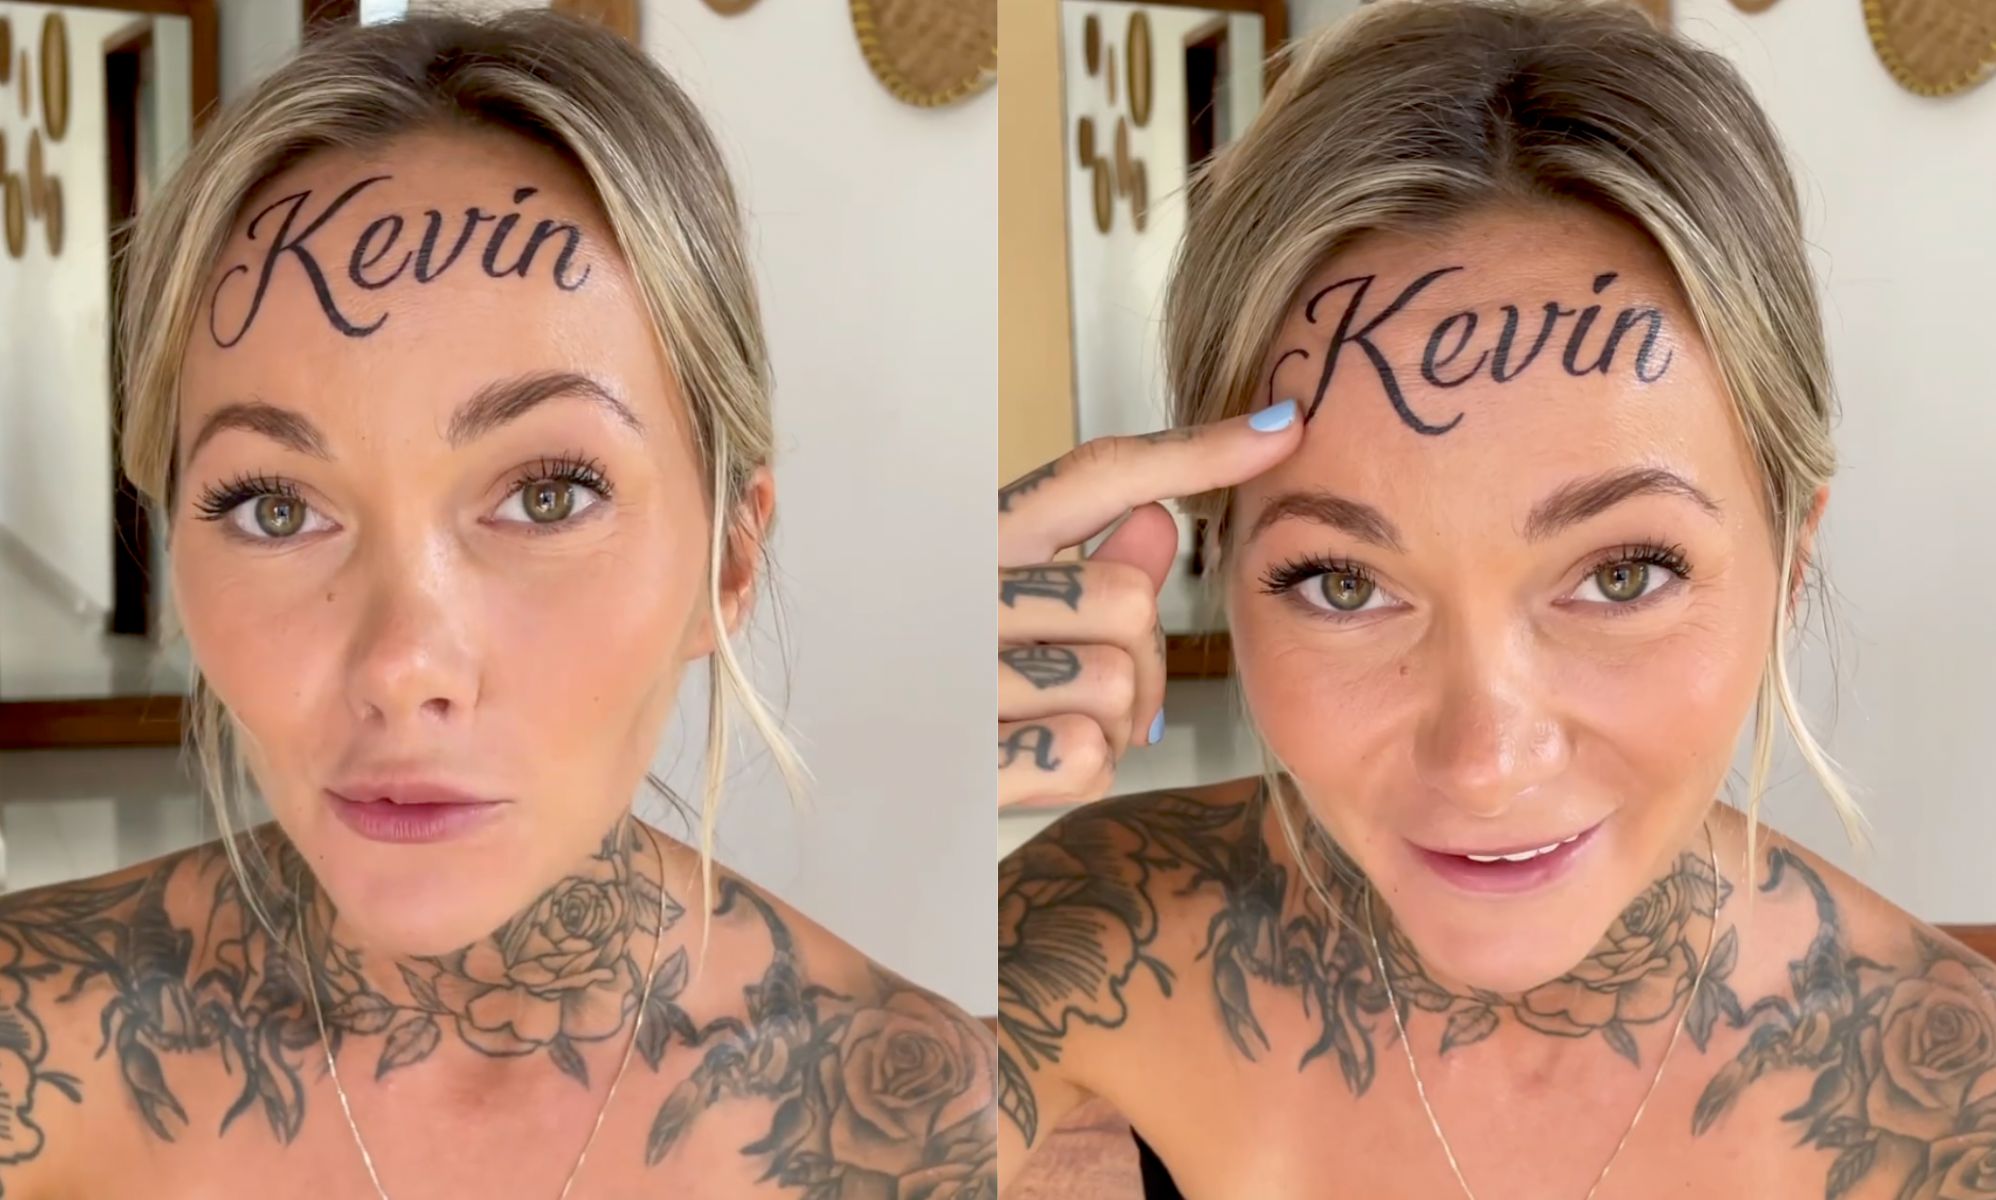 Celebrity tattoos and the danger of regret